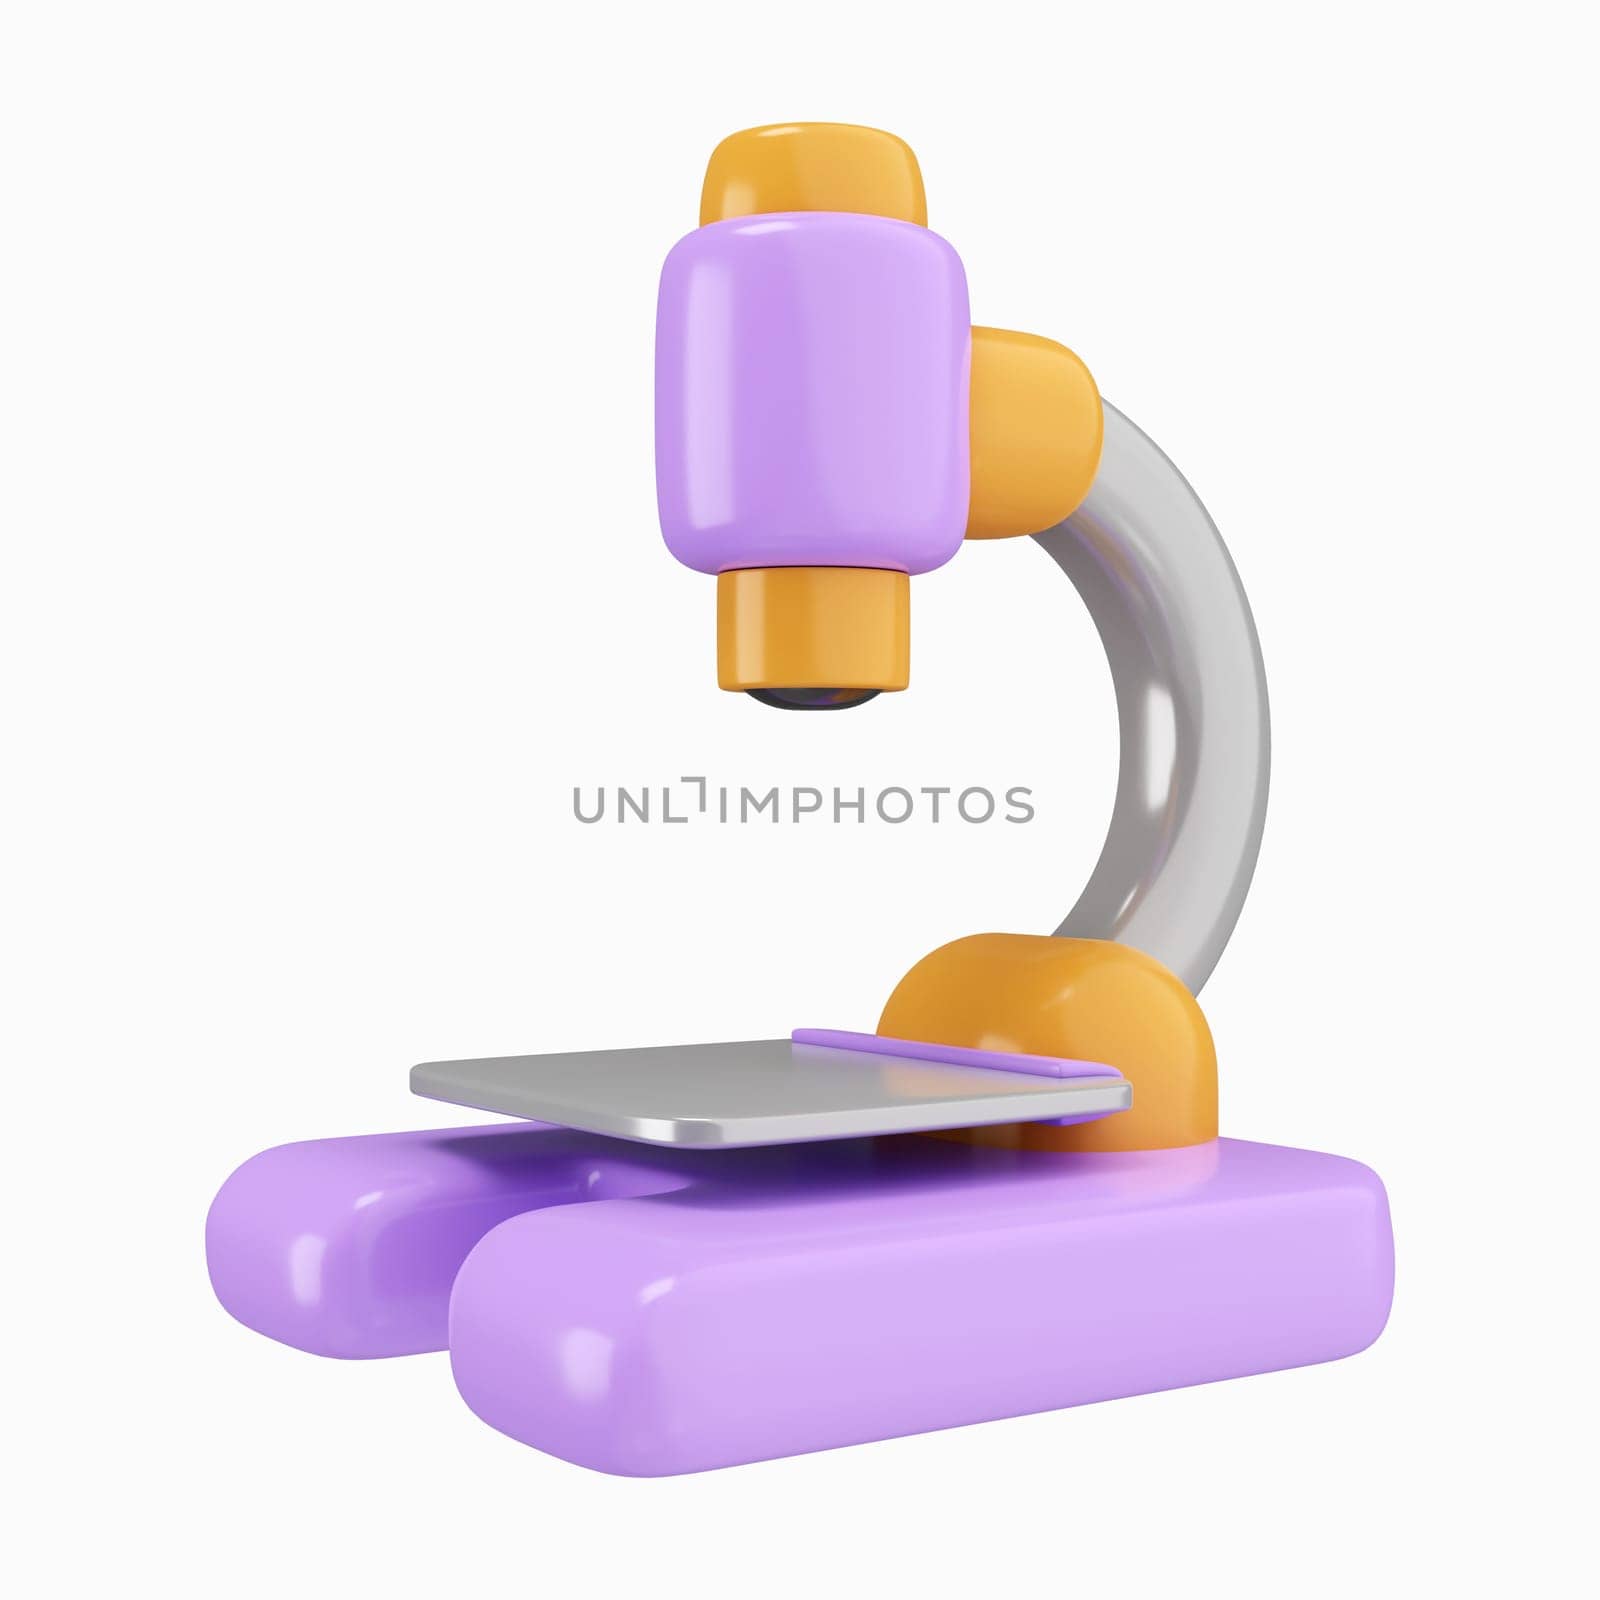 3d Microscope. pharmaceutical instrument, microbiology magnifying tool. icon symbol clipping path. 3d render illustration.